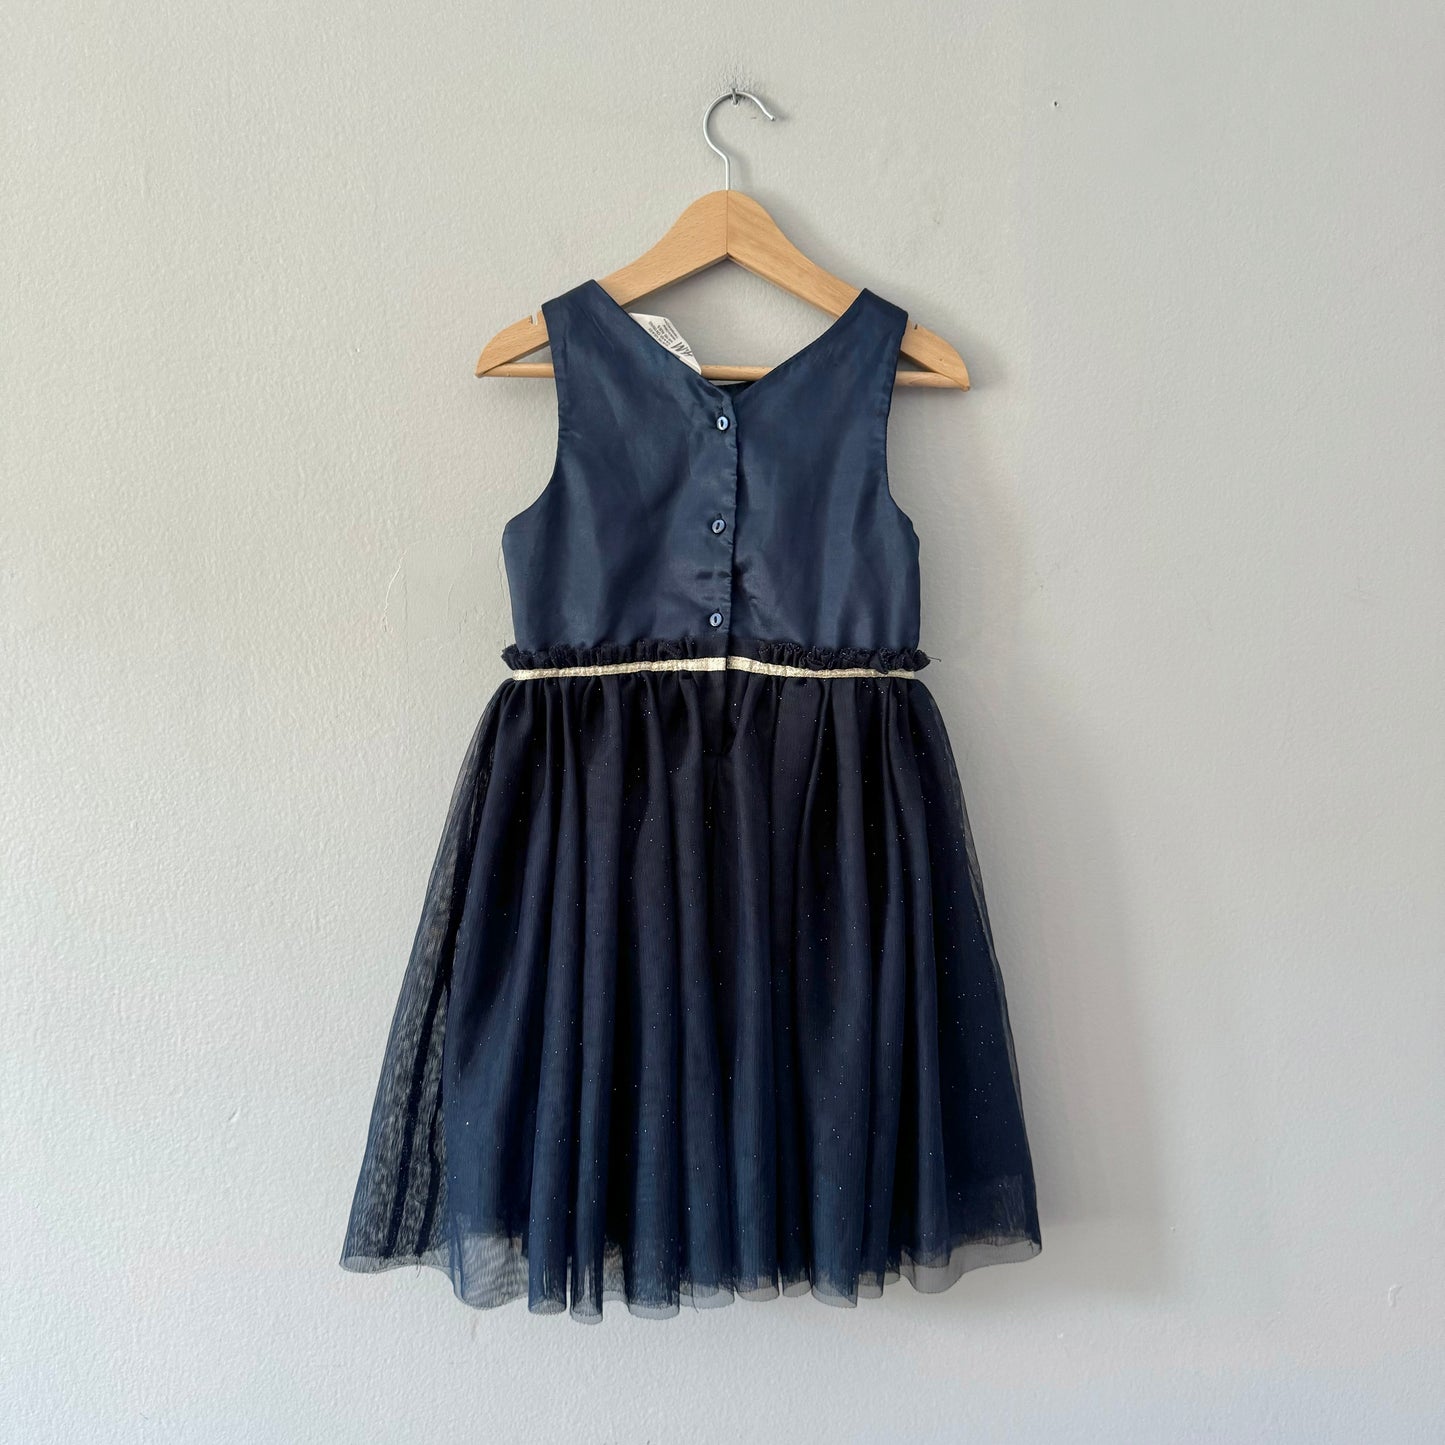 H&M / Navy party dress / 4-5Y